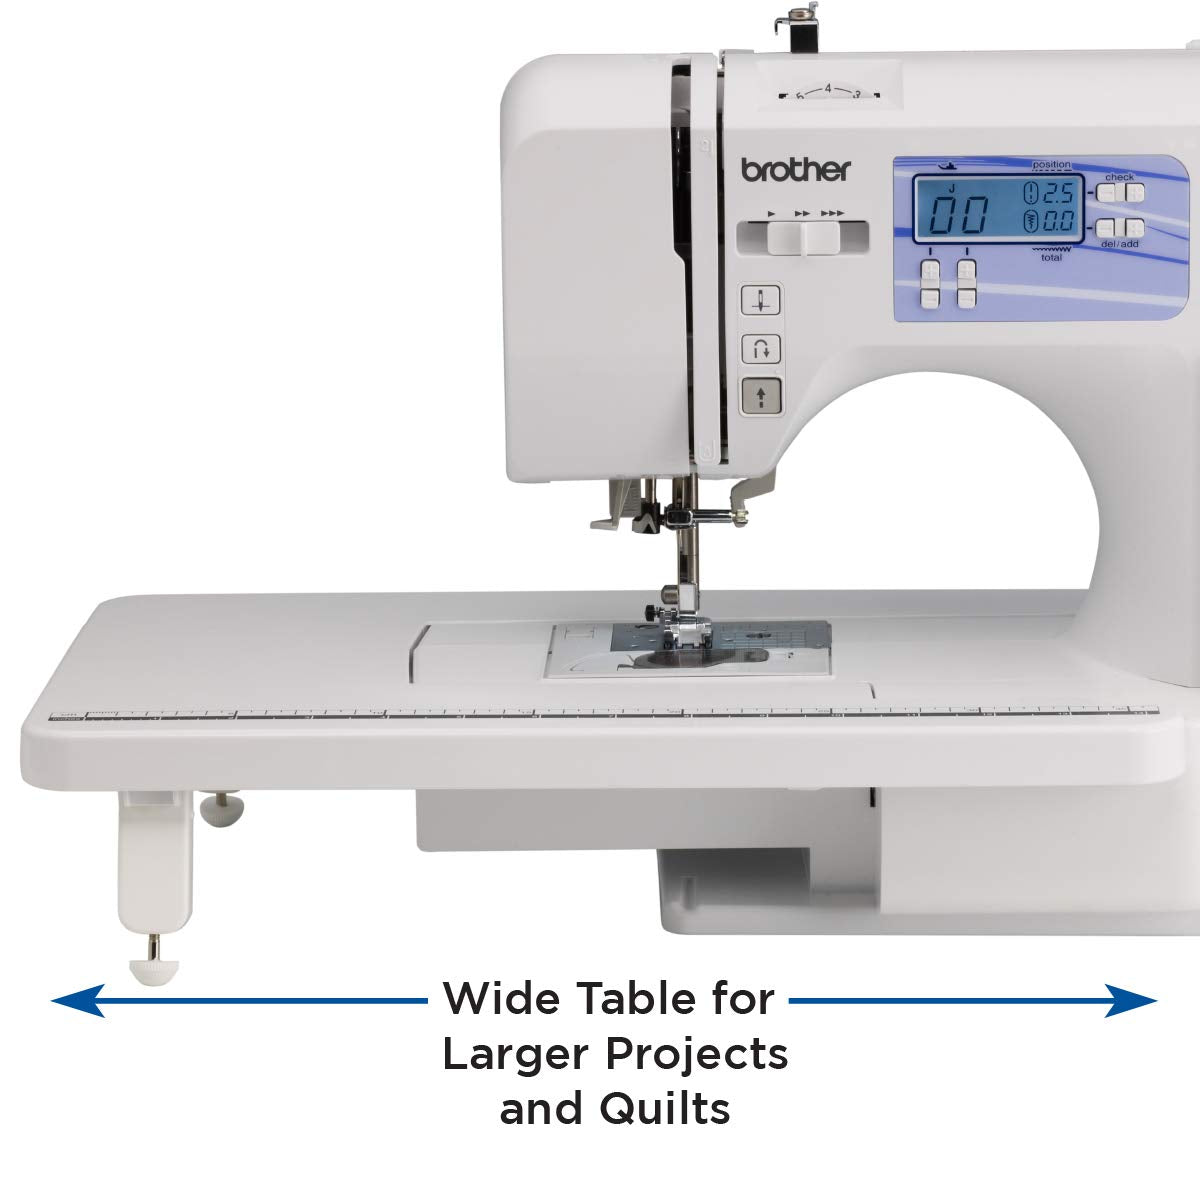 Brother Sewing & Quilting Machine, HC1850, 185 Built-in Stitches, LCD Display, 8 Included Sewing Feet (8180336787694)